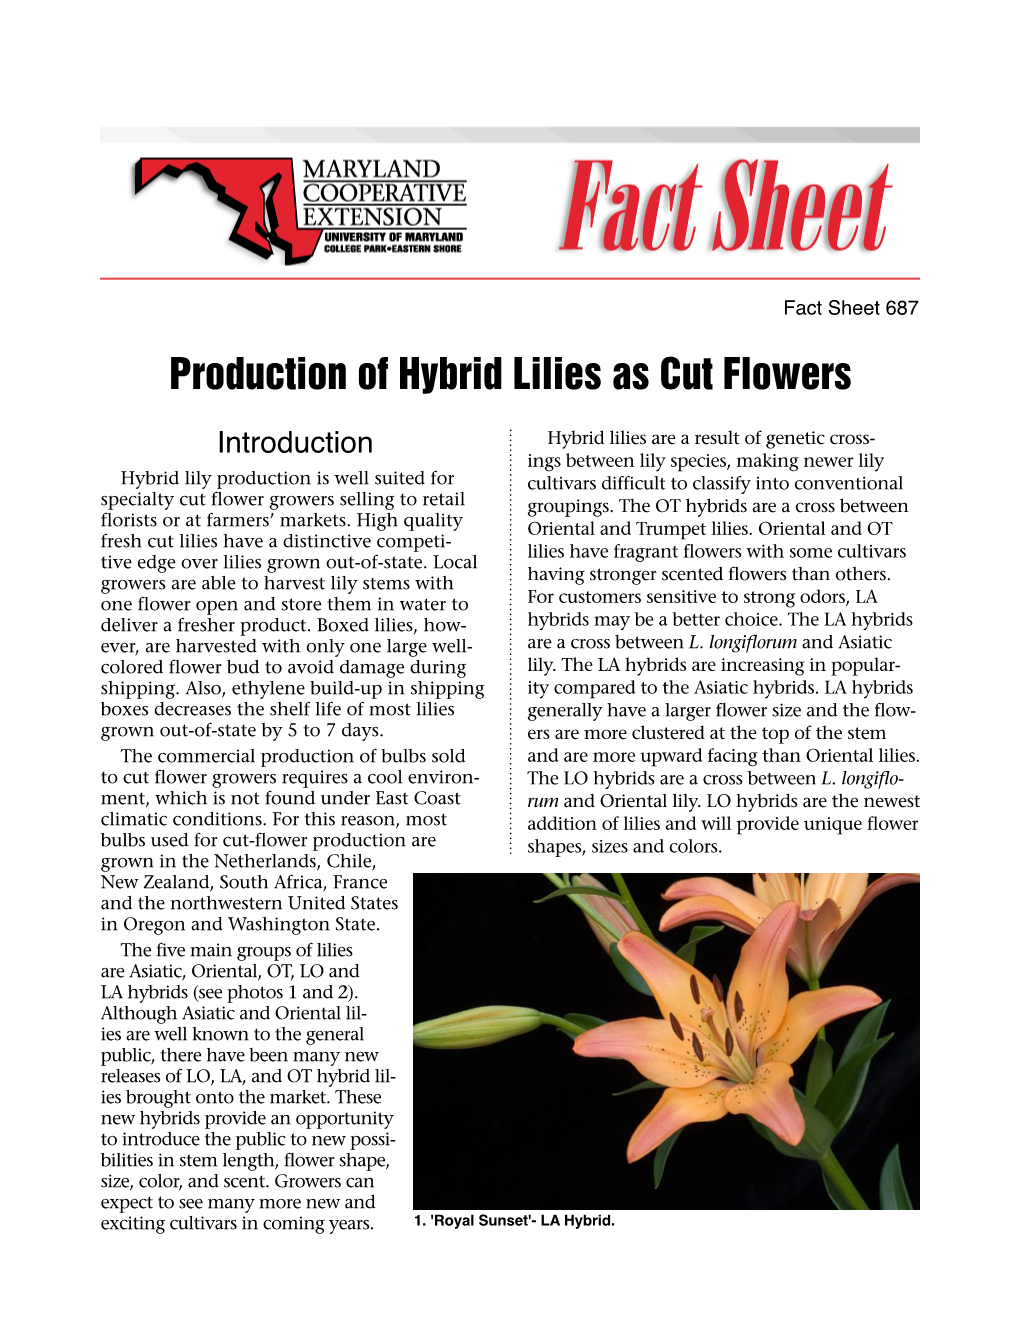 Production of Hybrid Lilies As Cut Flowers